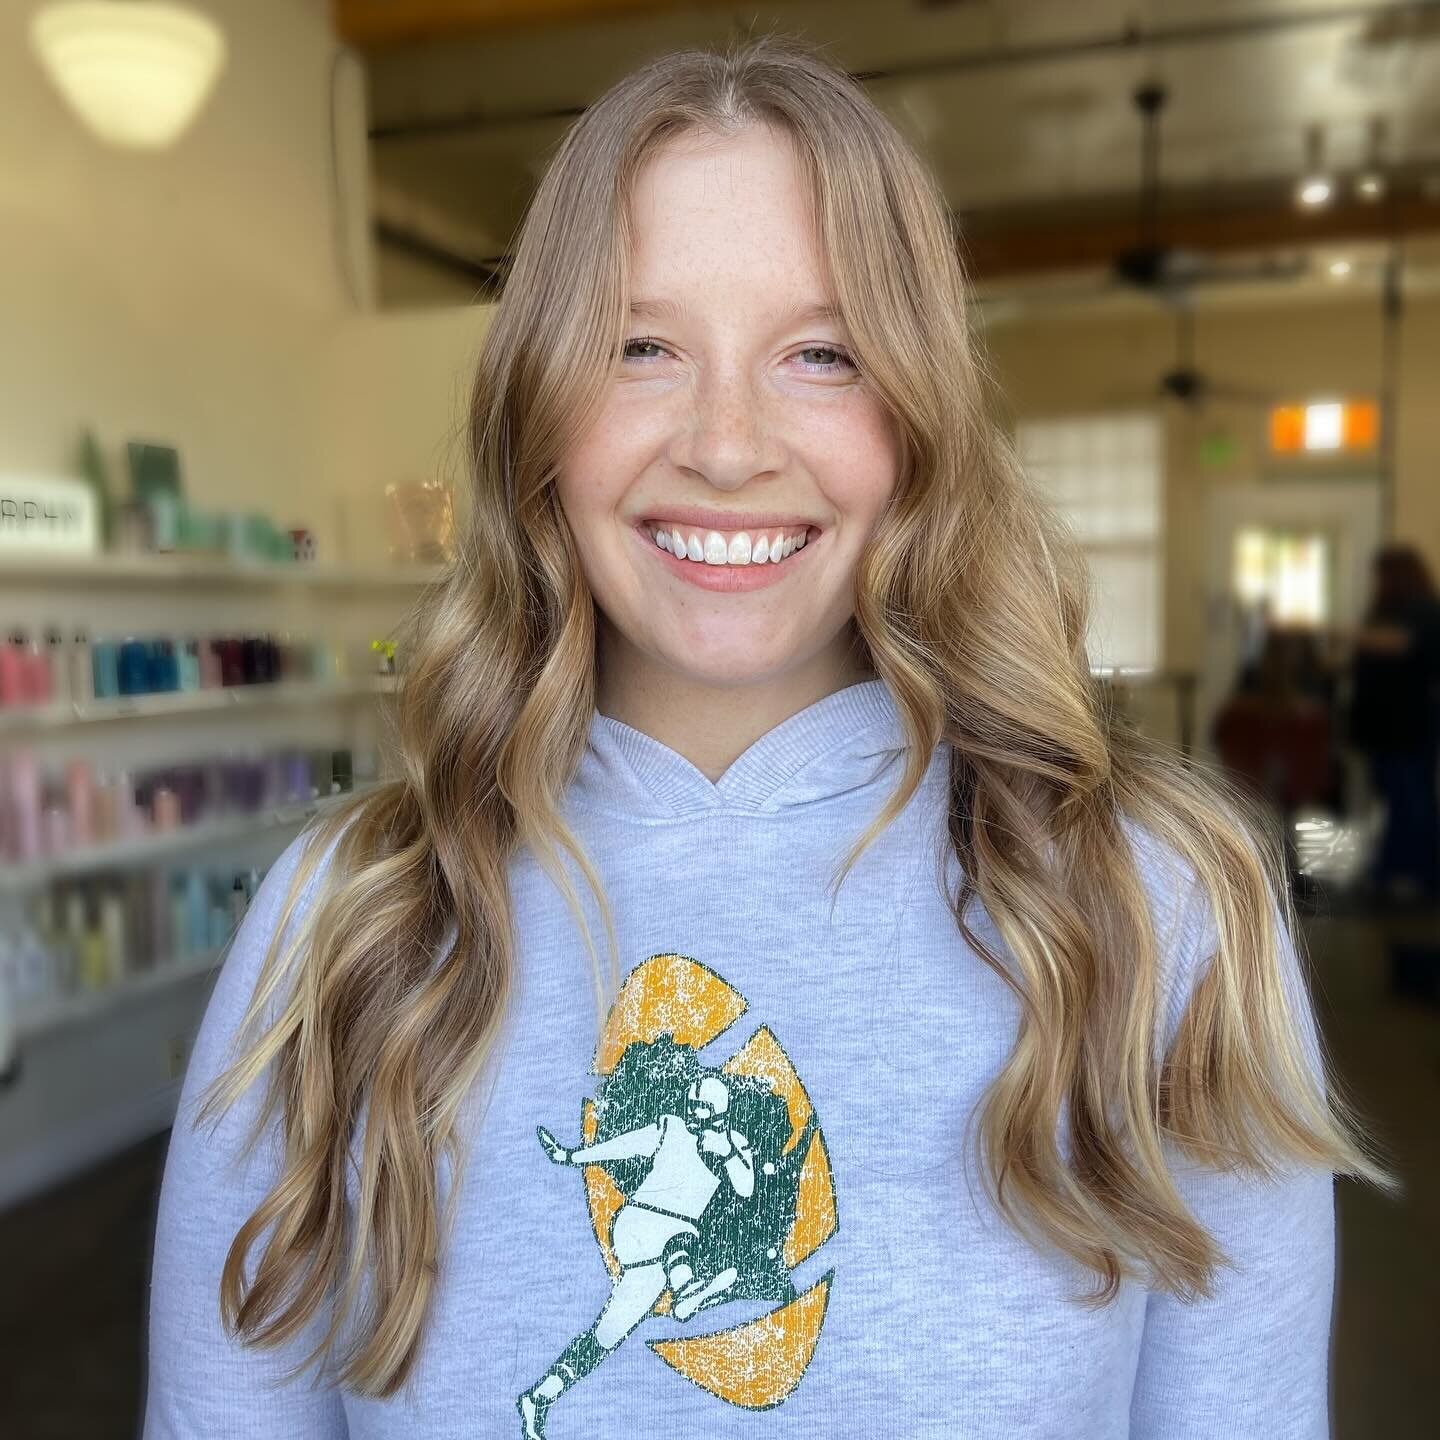 HiveU for the win again! Just a trim and some perfectly soft waves to frame this gorgeous smile. 😍

We&rsquo;ve still got time before the holiday break for trims, glosses, treatments and colors! 💇🏽&zwj;♀️🪩🧖&zwj;♀️🎨

You can call, text, email or